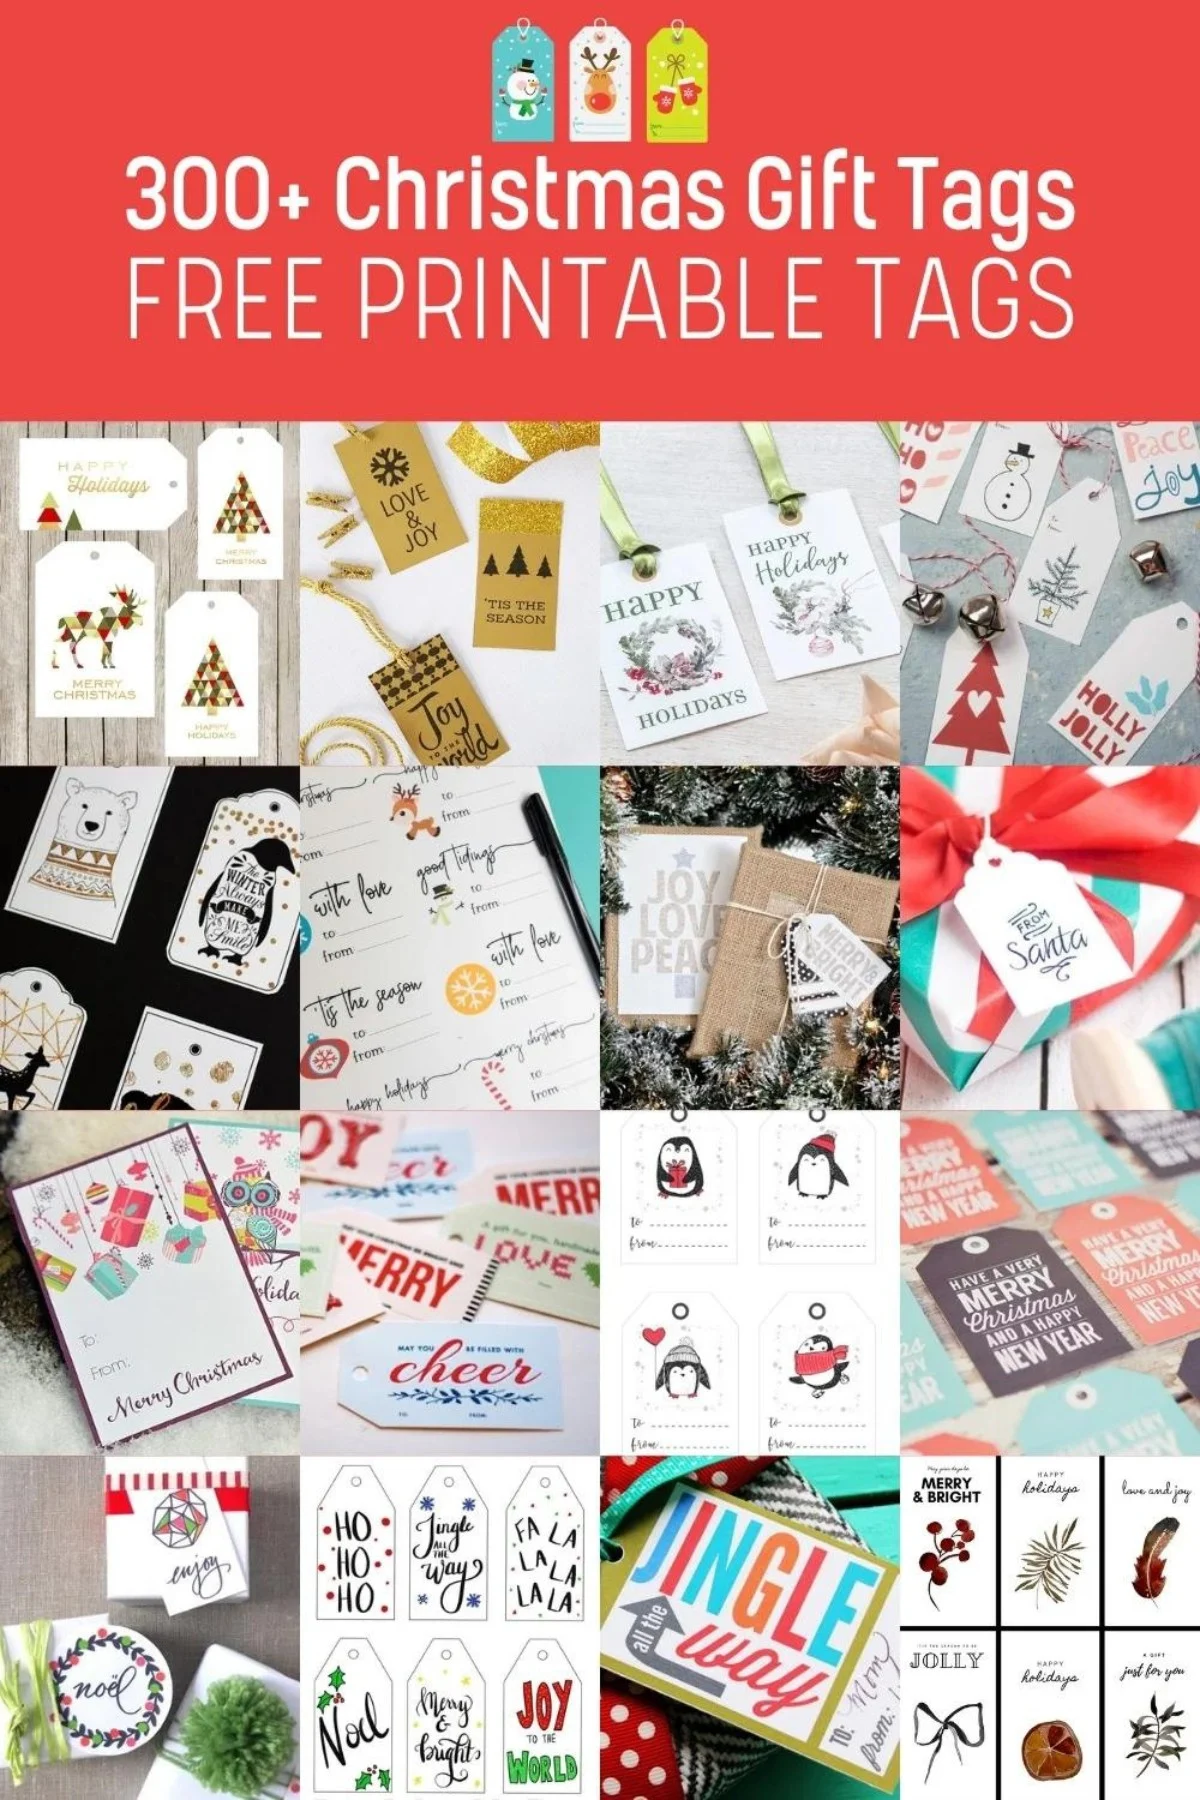 33 DIY Christmas Gifts for Coworkers with Free Printables - Avery